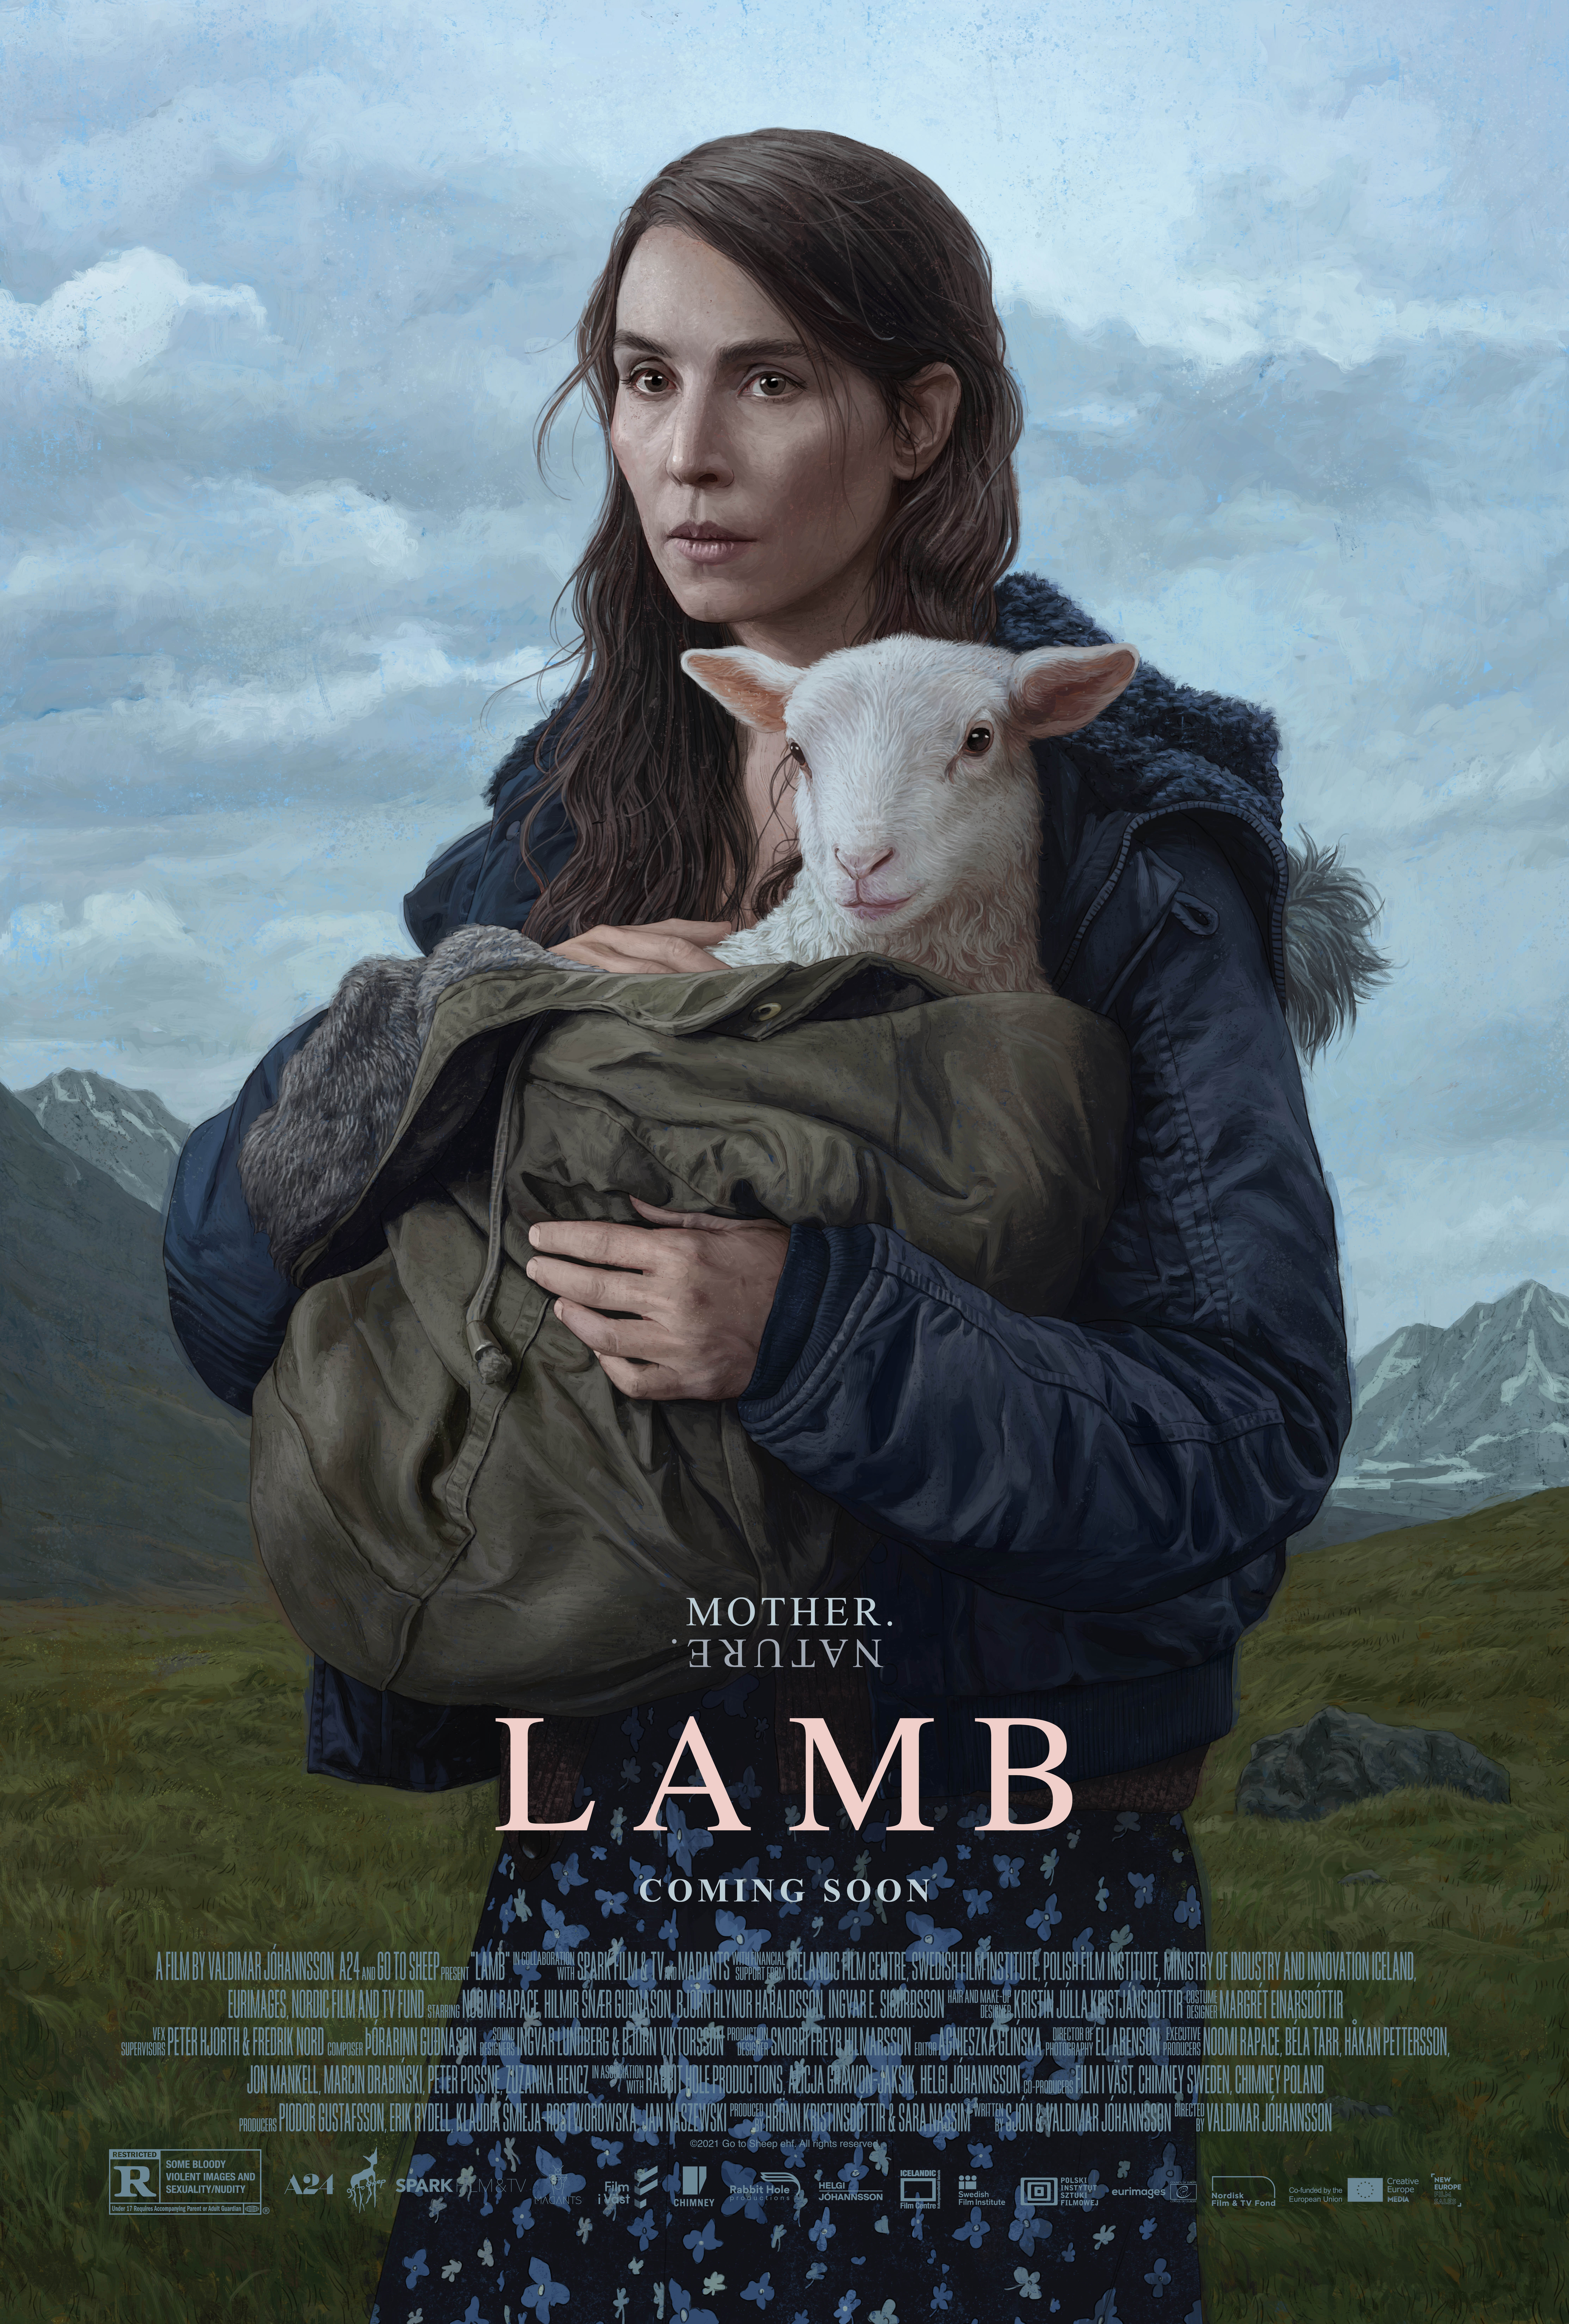 Lamb Poster with Noomi Rapace